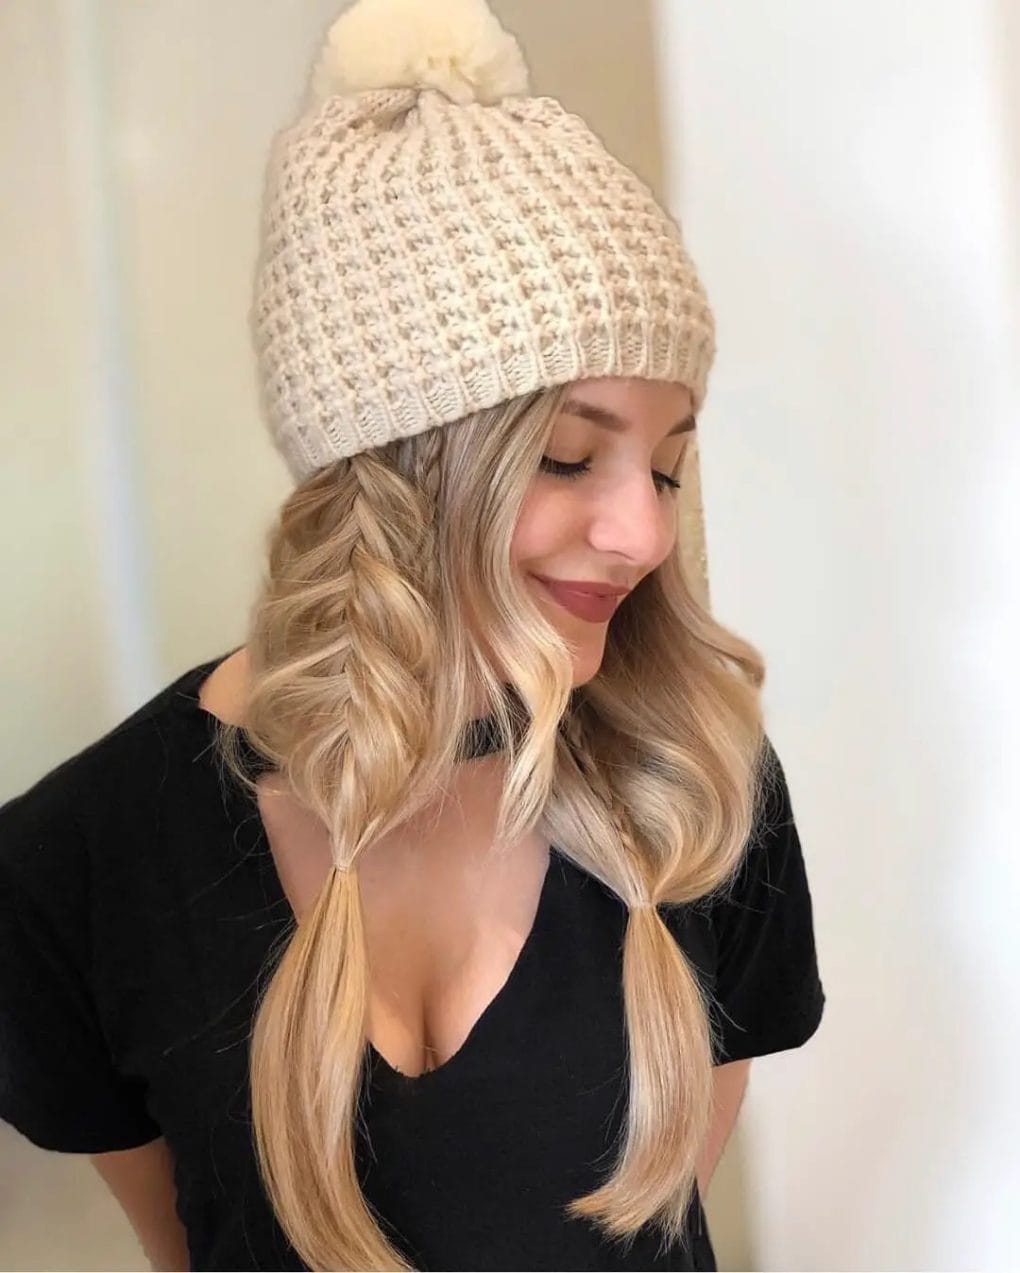 Golden blonde waves enhanced by a chunky knit creamy beanie with pompom.